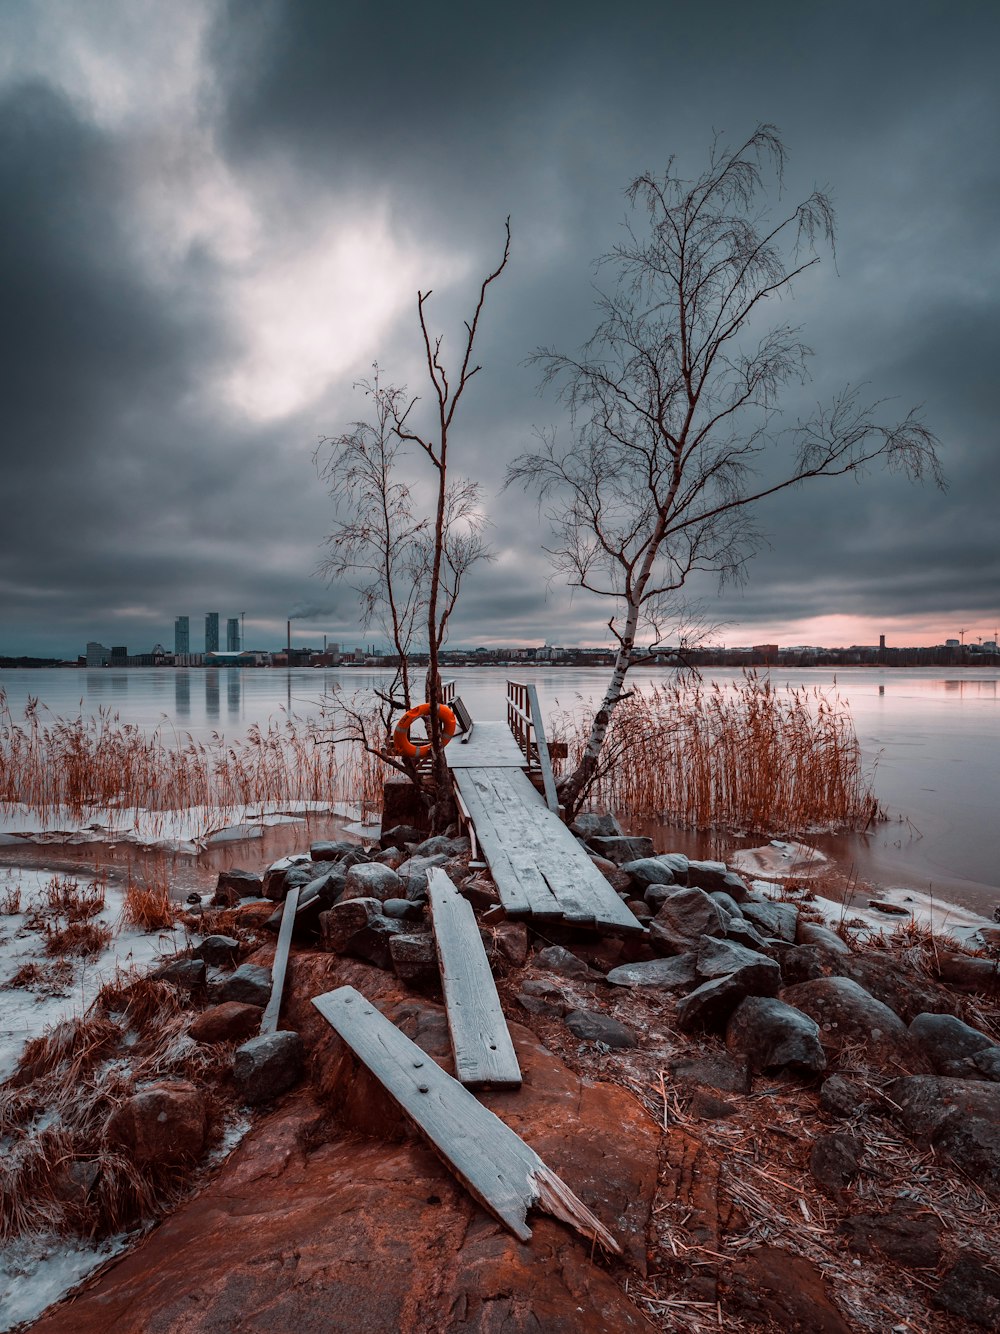 a wooden dock sitting next to a body of water under a cloudy sky